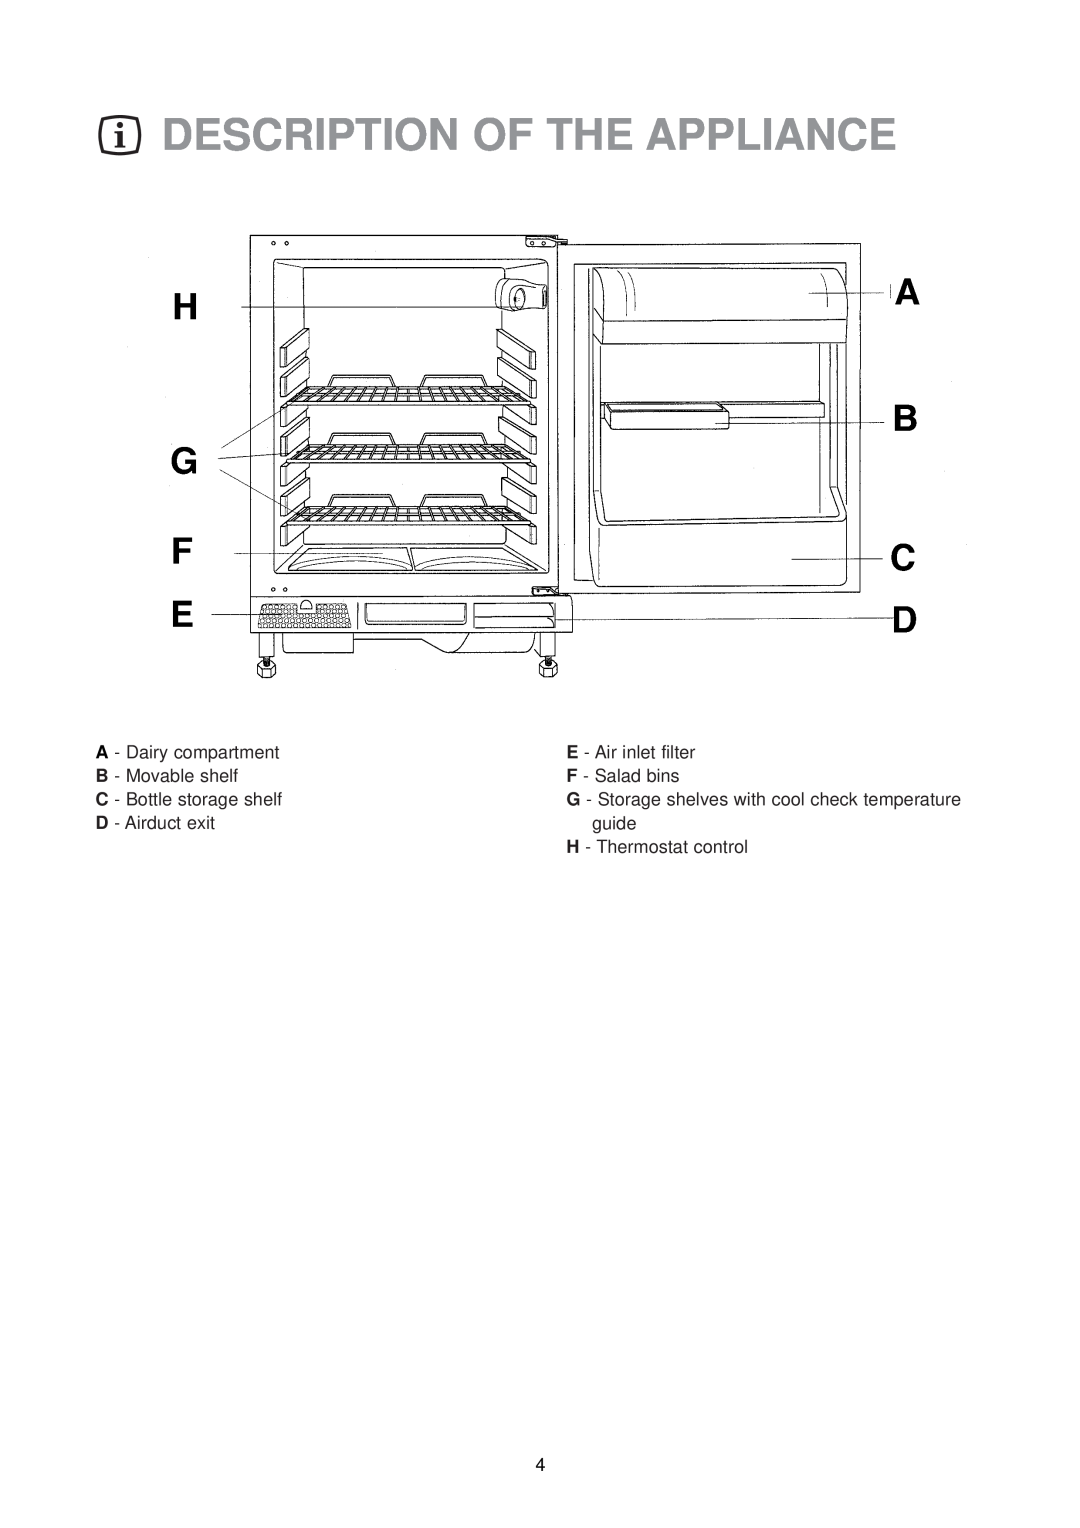 Zanussi ZU 7155 manual Description Of The Appliance, A - Dairy compartment, E - Air inlet filter, B - Movable shelf, guide 